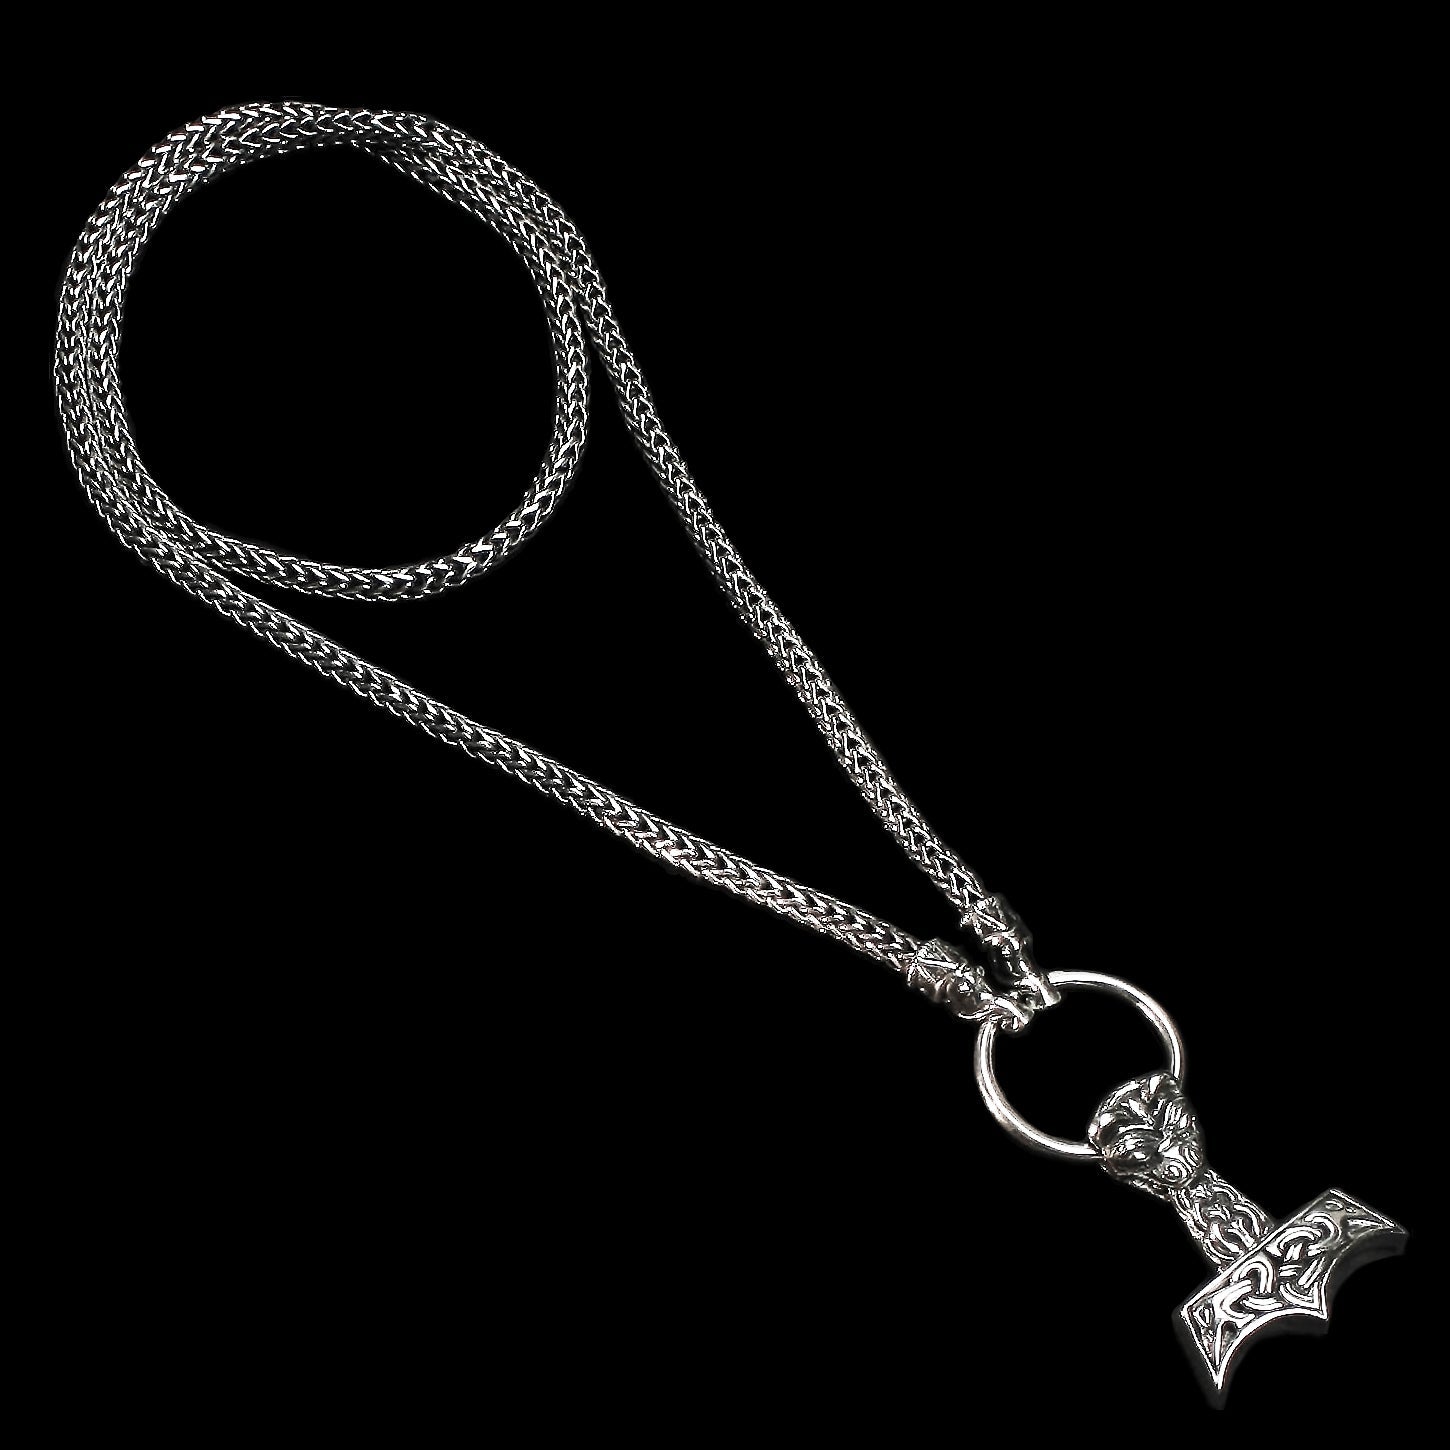 Silver Thor's Hammer Necklace with Gotlandic Dragon Heads - Large & Ferocious Silver Thor's Hammer